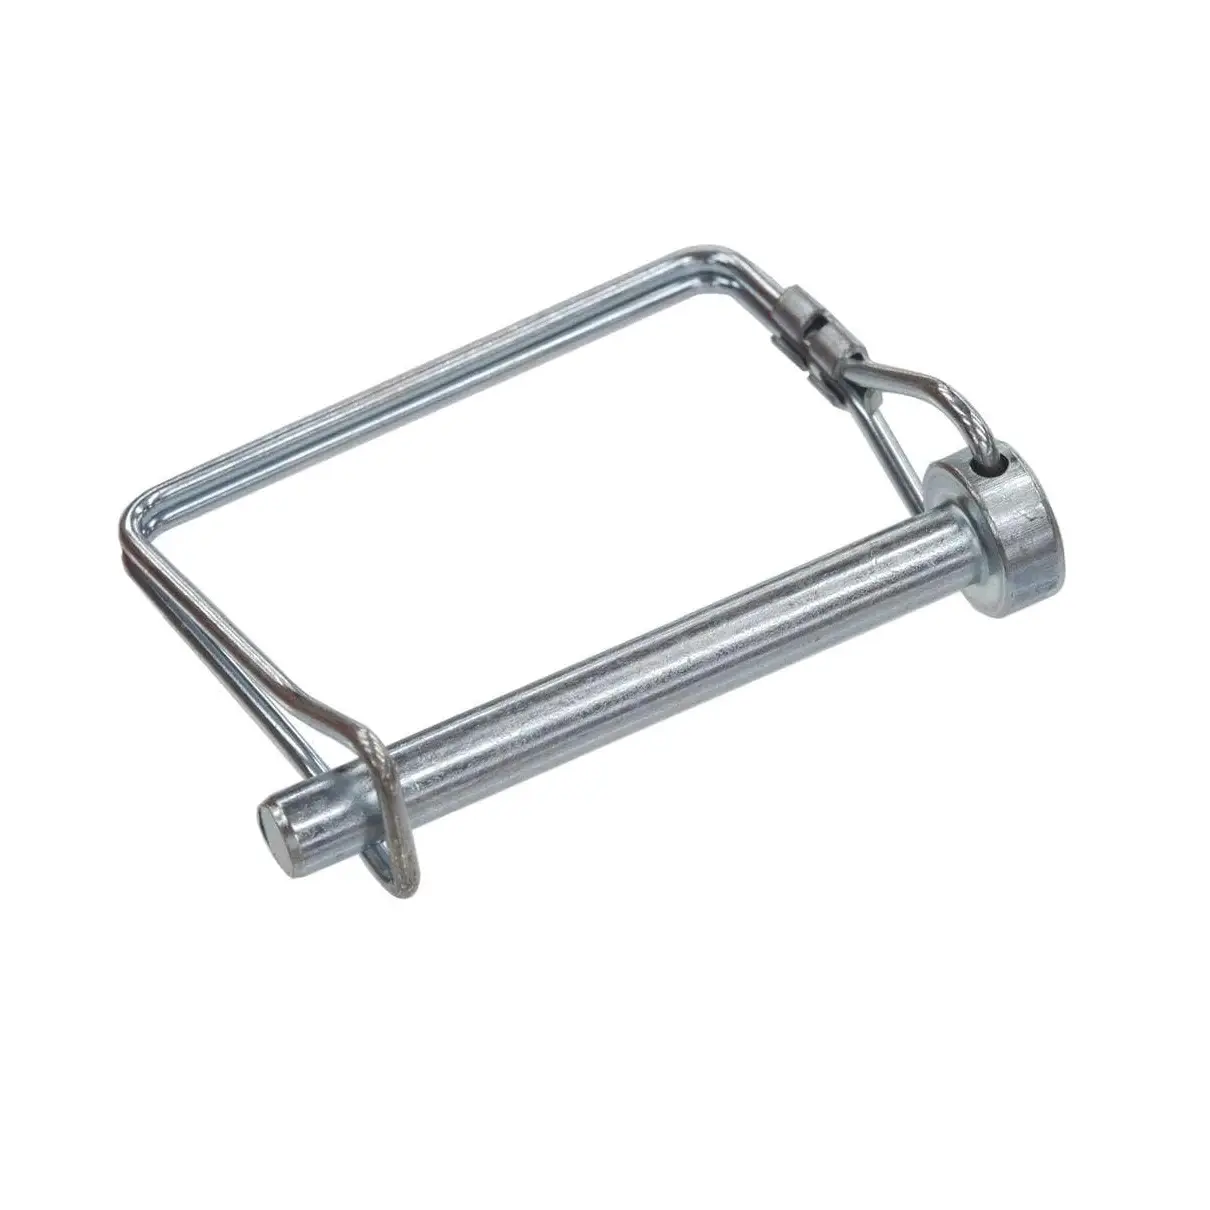 New Arrival Top Selling Stainless Steel Lock Hitch Pin with Double Chain for Securing Trailer Couplers from India